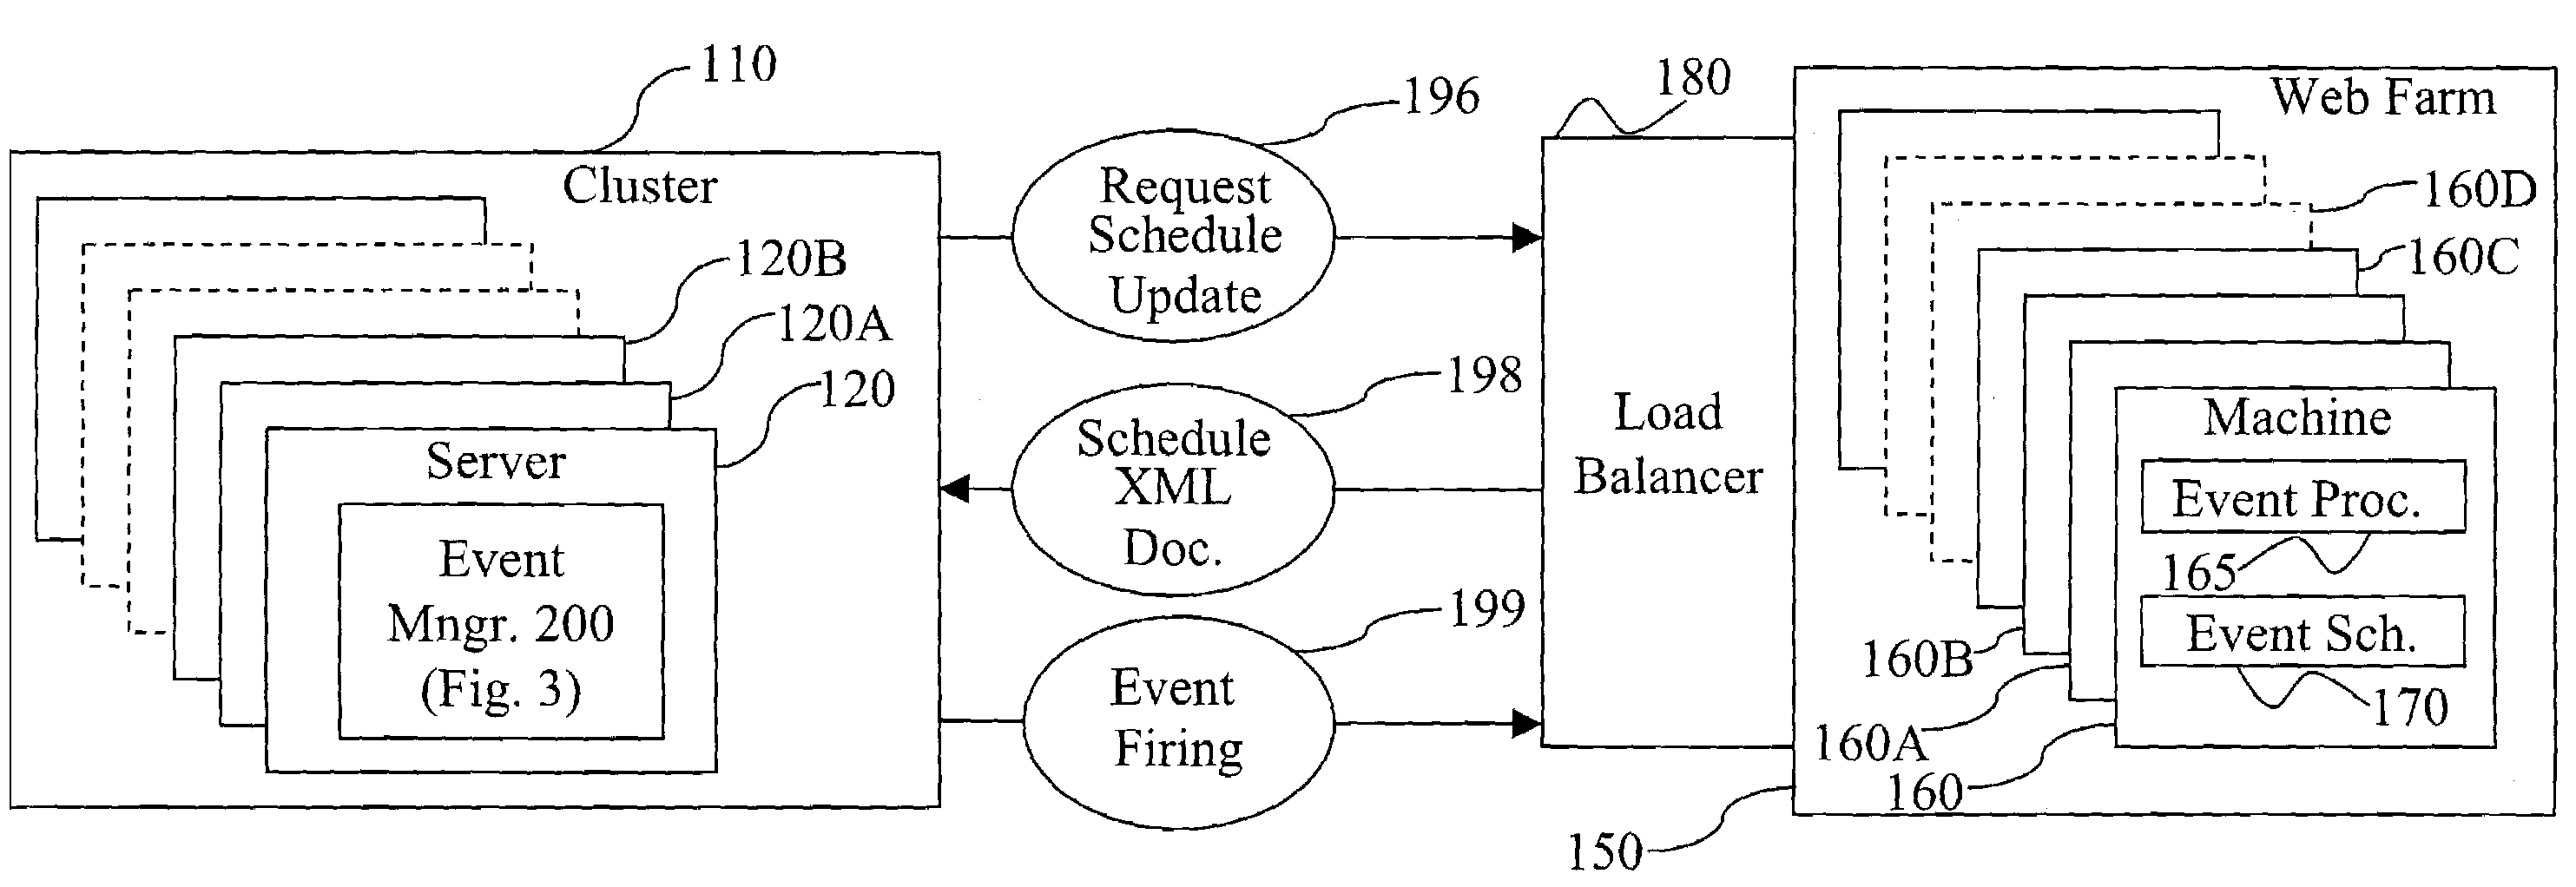 Method and apparatus and program for scheduling and executing events in real time over a network